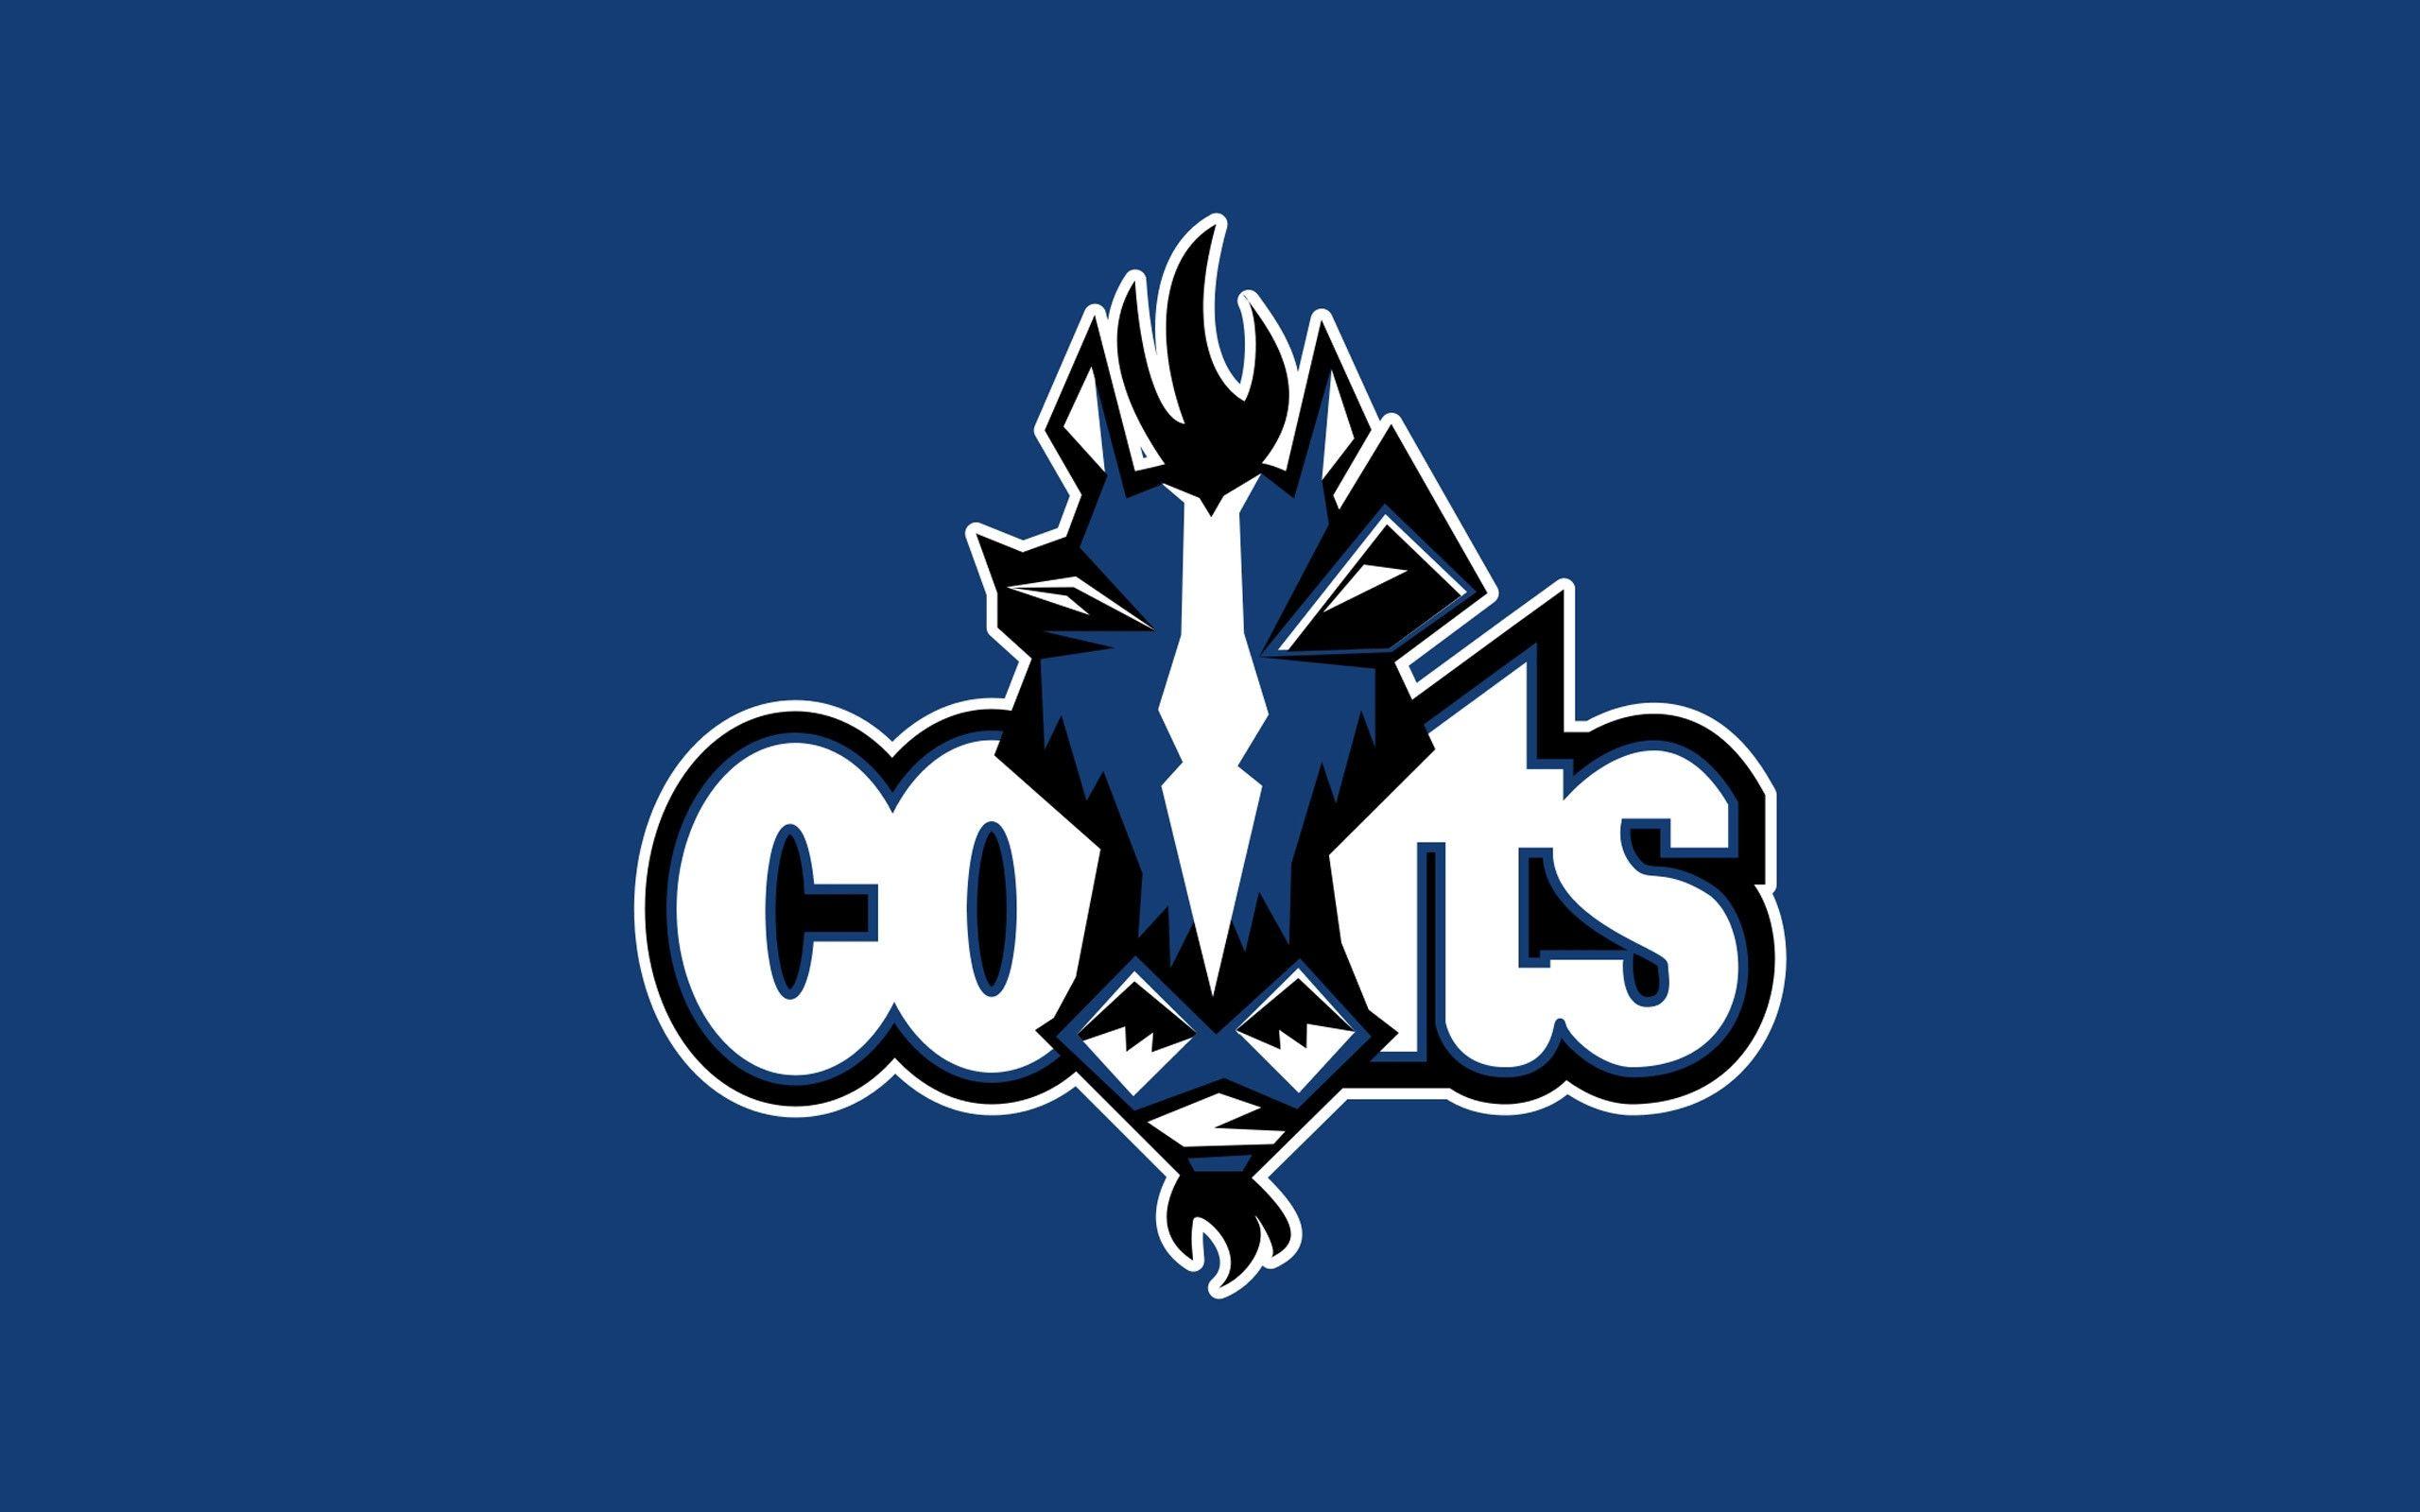 Indianapolis Colts 2014 NFL Logo Wallpapers Wide or HD